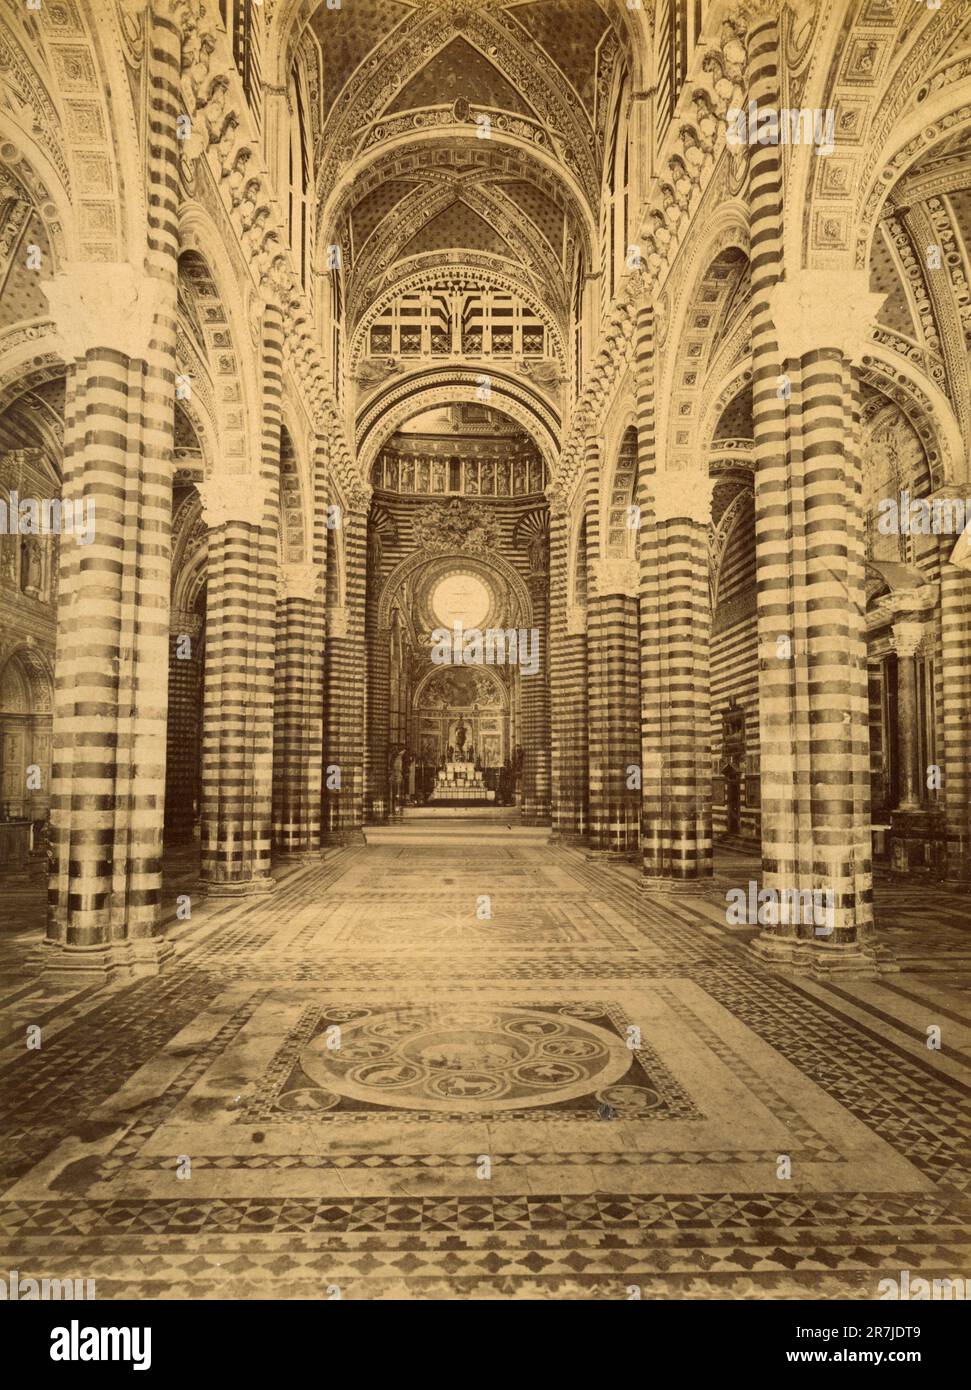 Inside view of Siena cathedral, Italy 1880s Stock Photo